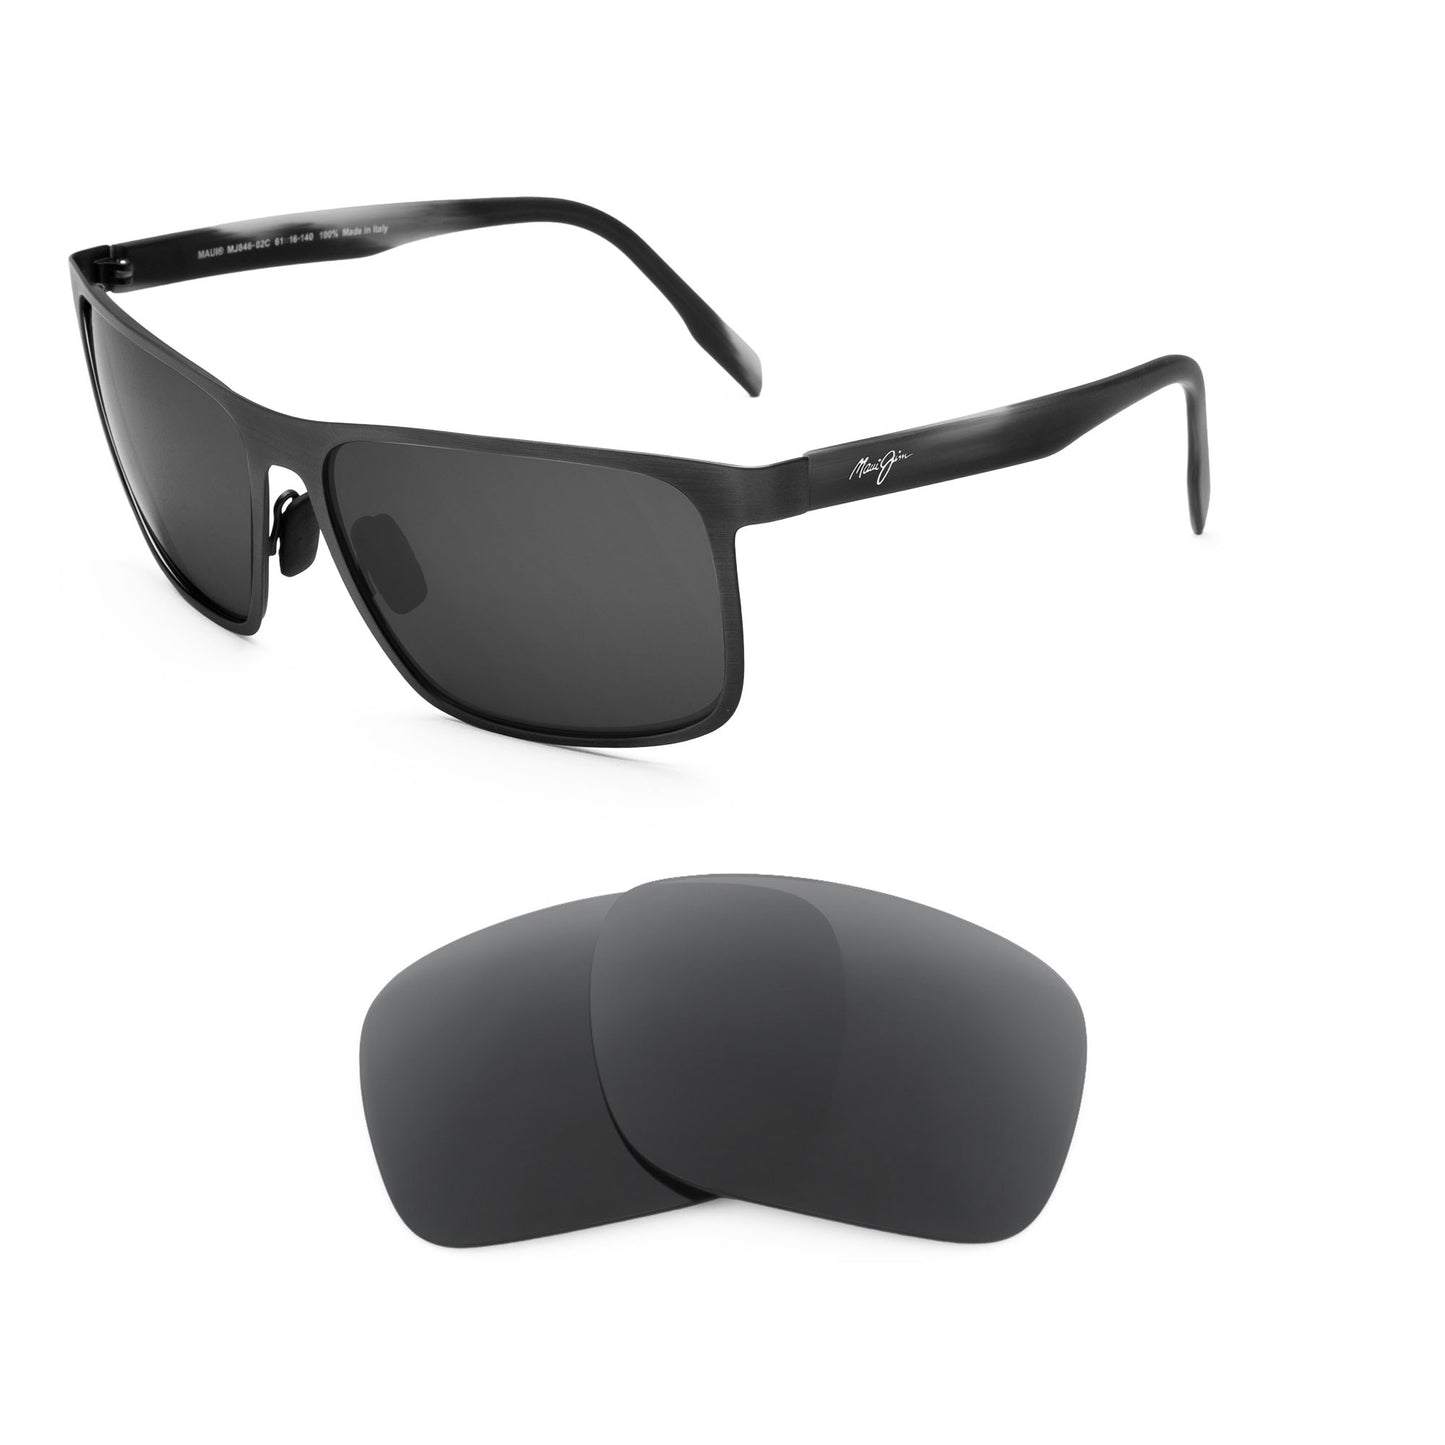 Maui Jim Wana MJ846 sunglasses with replacement lenses